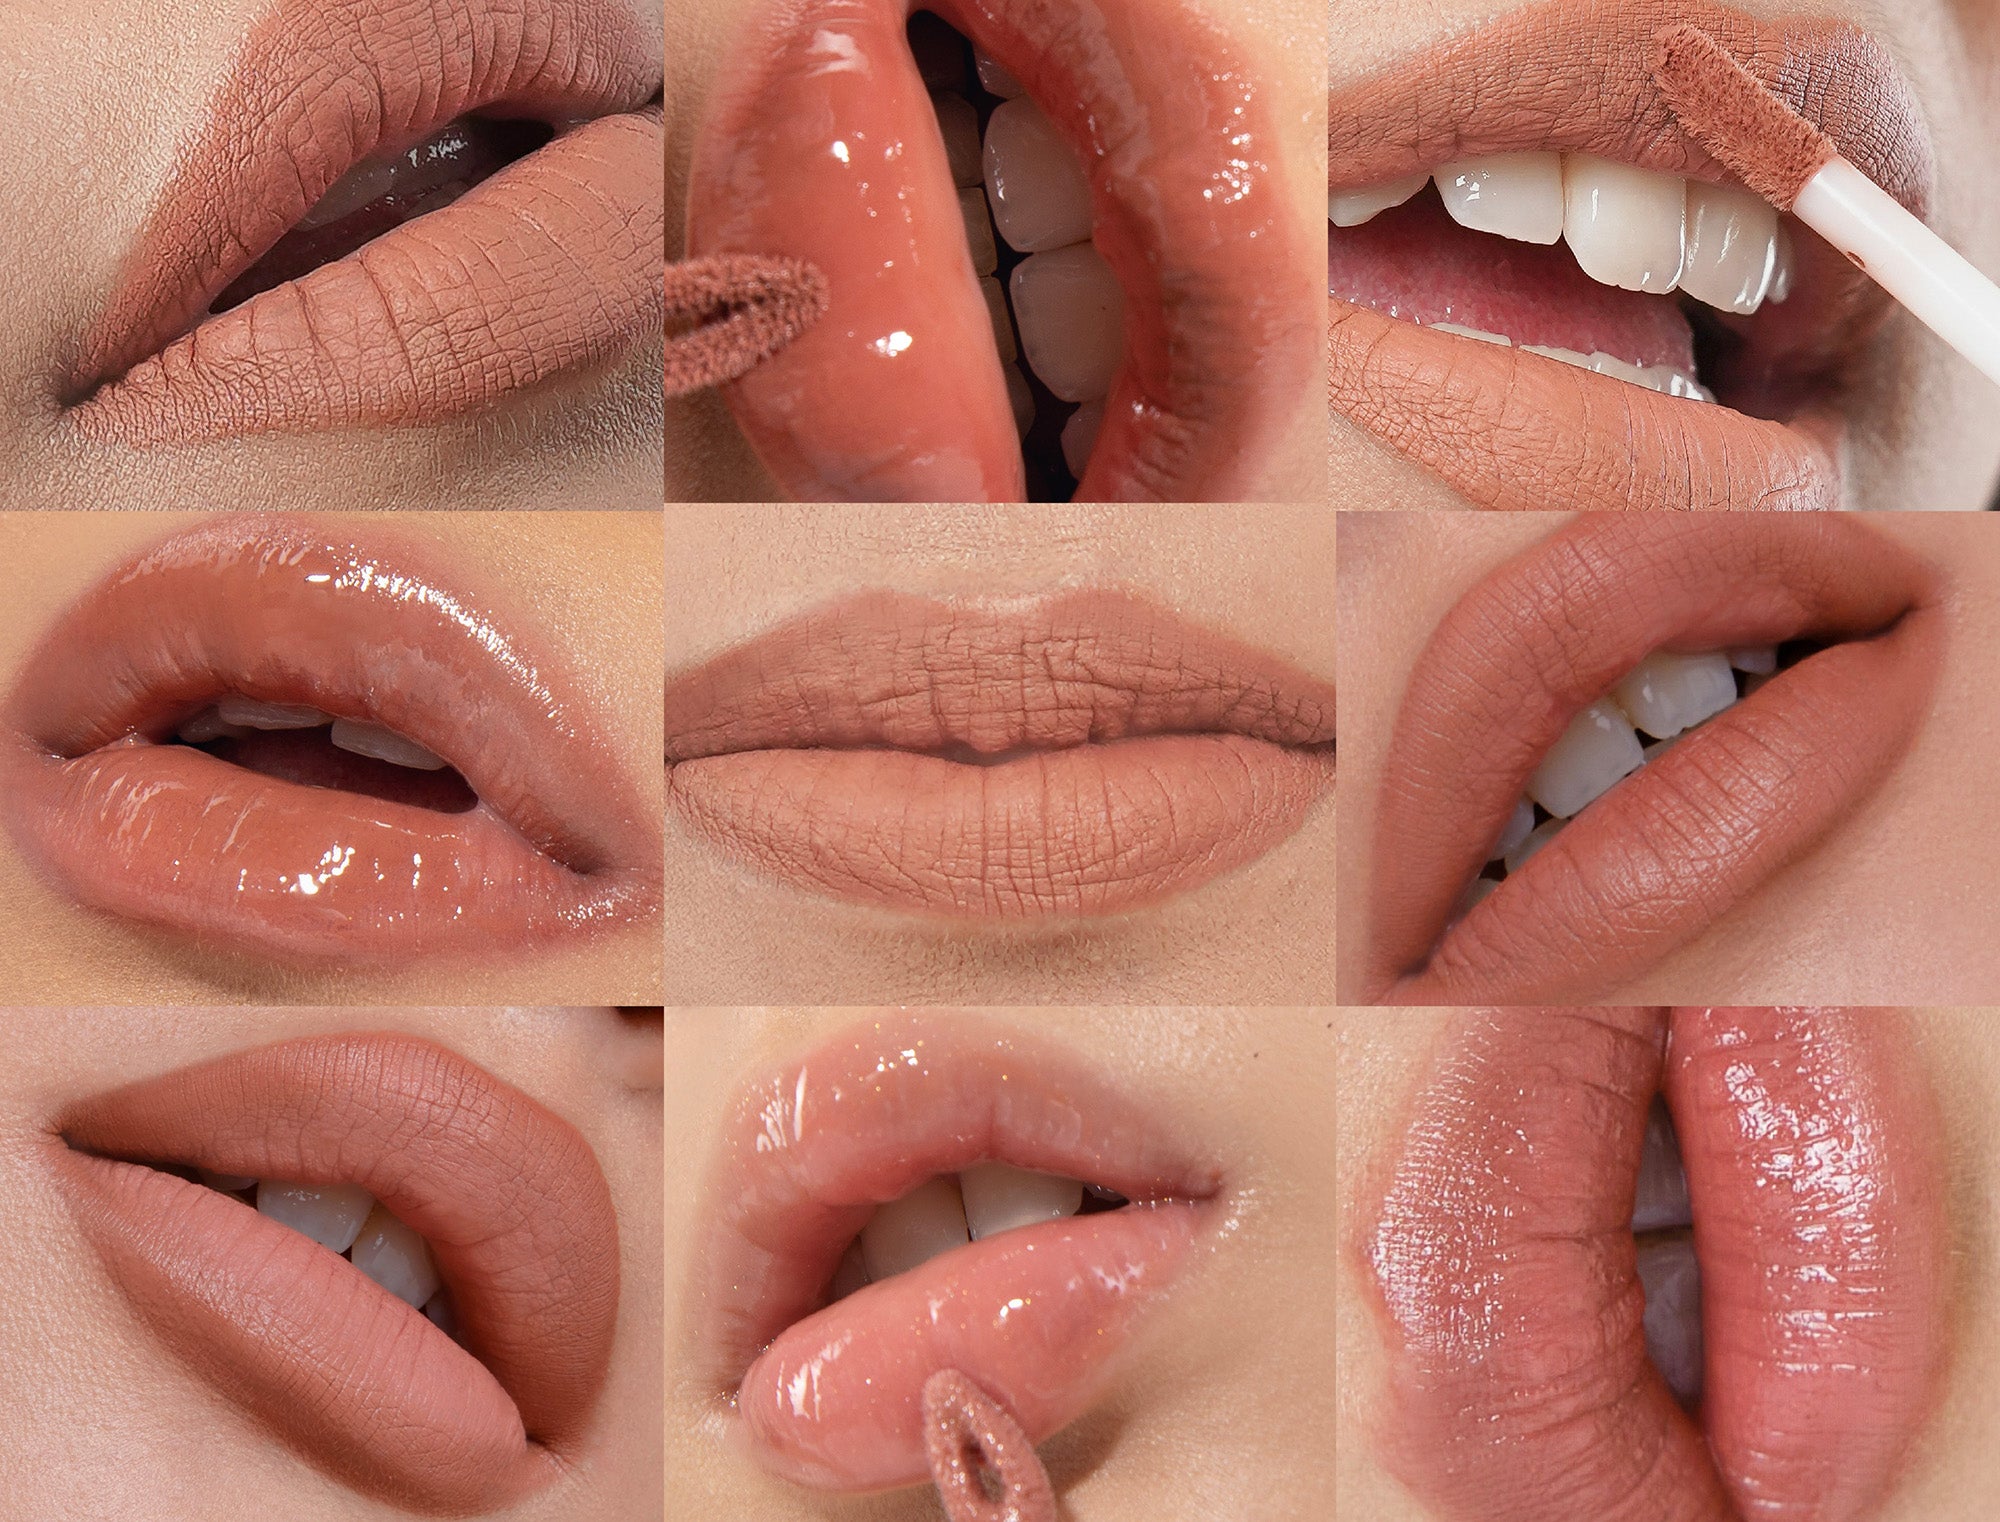 NOW TALKING | BREAKING NEWS: NUDE LIPS ARE FOR EVERYONE